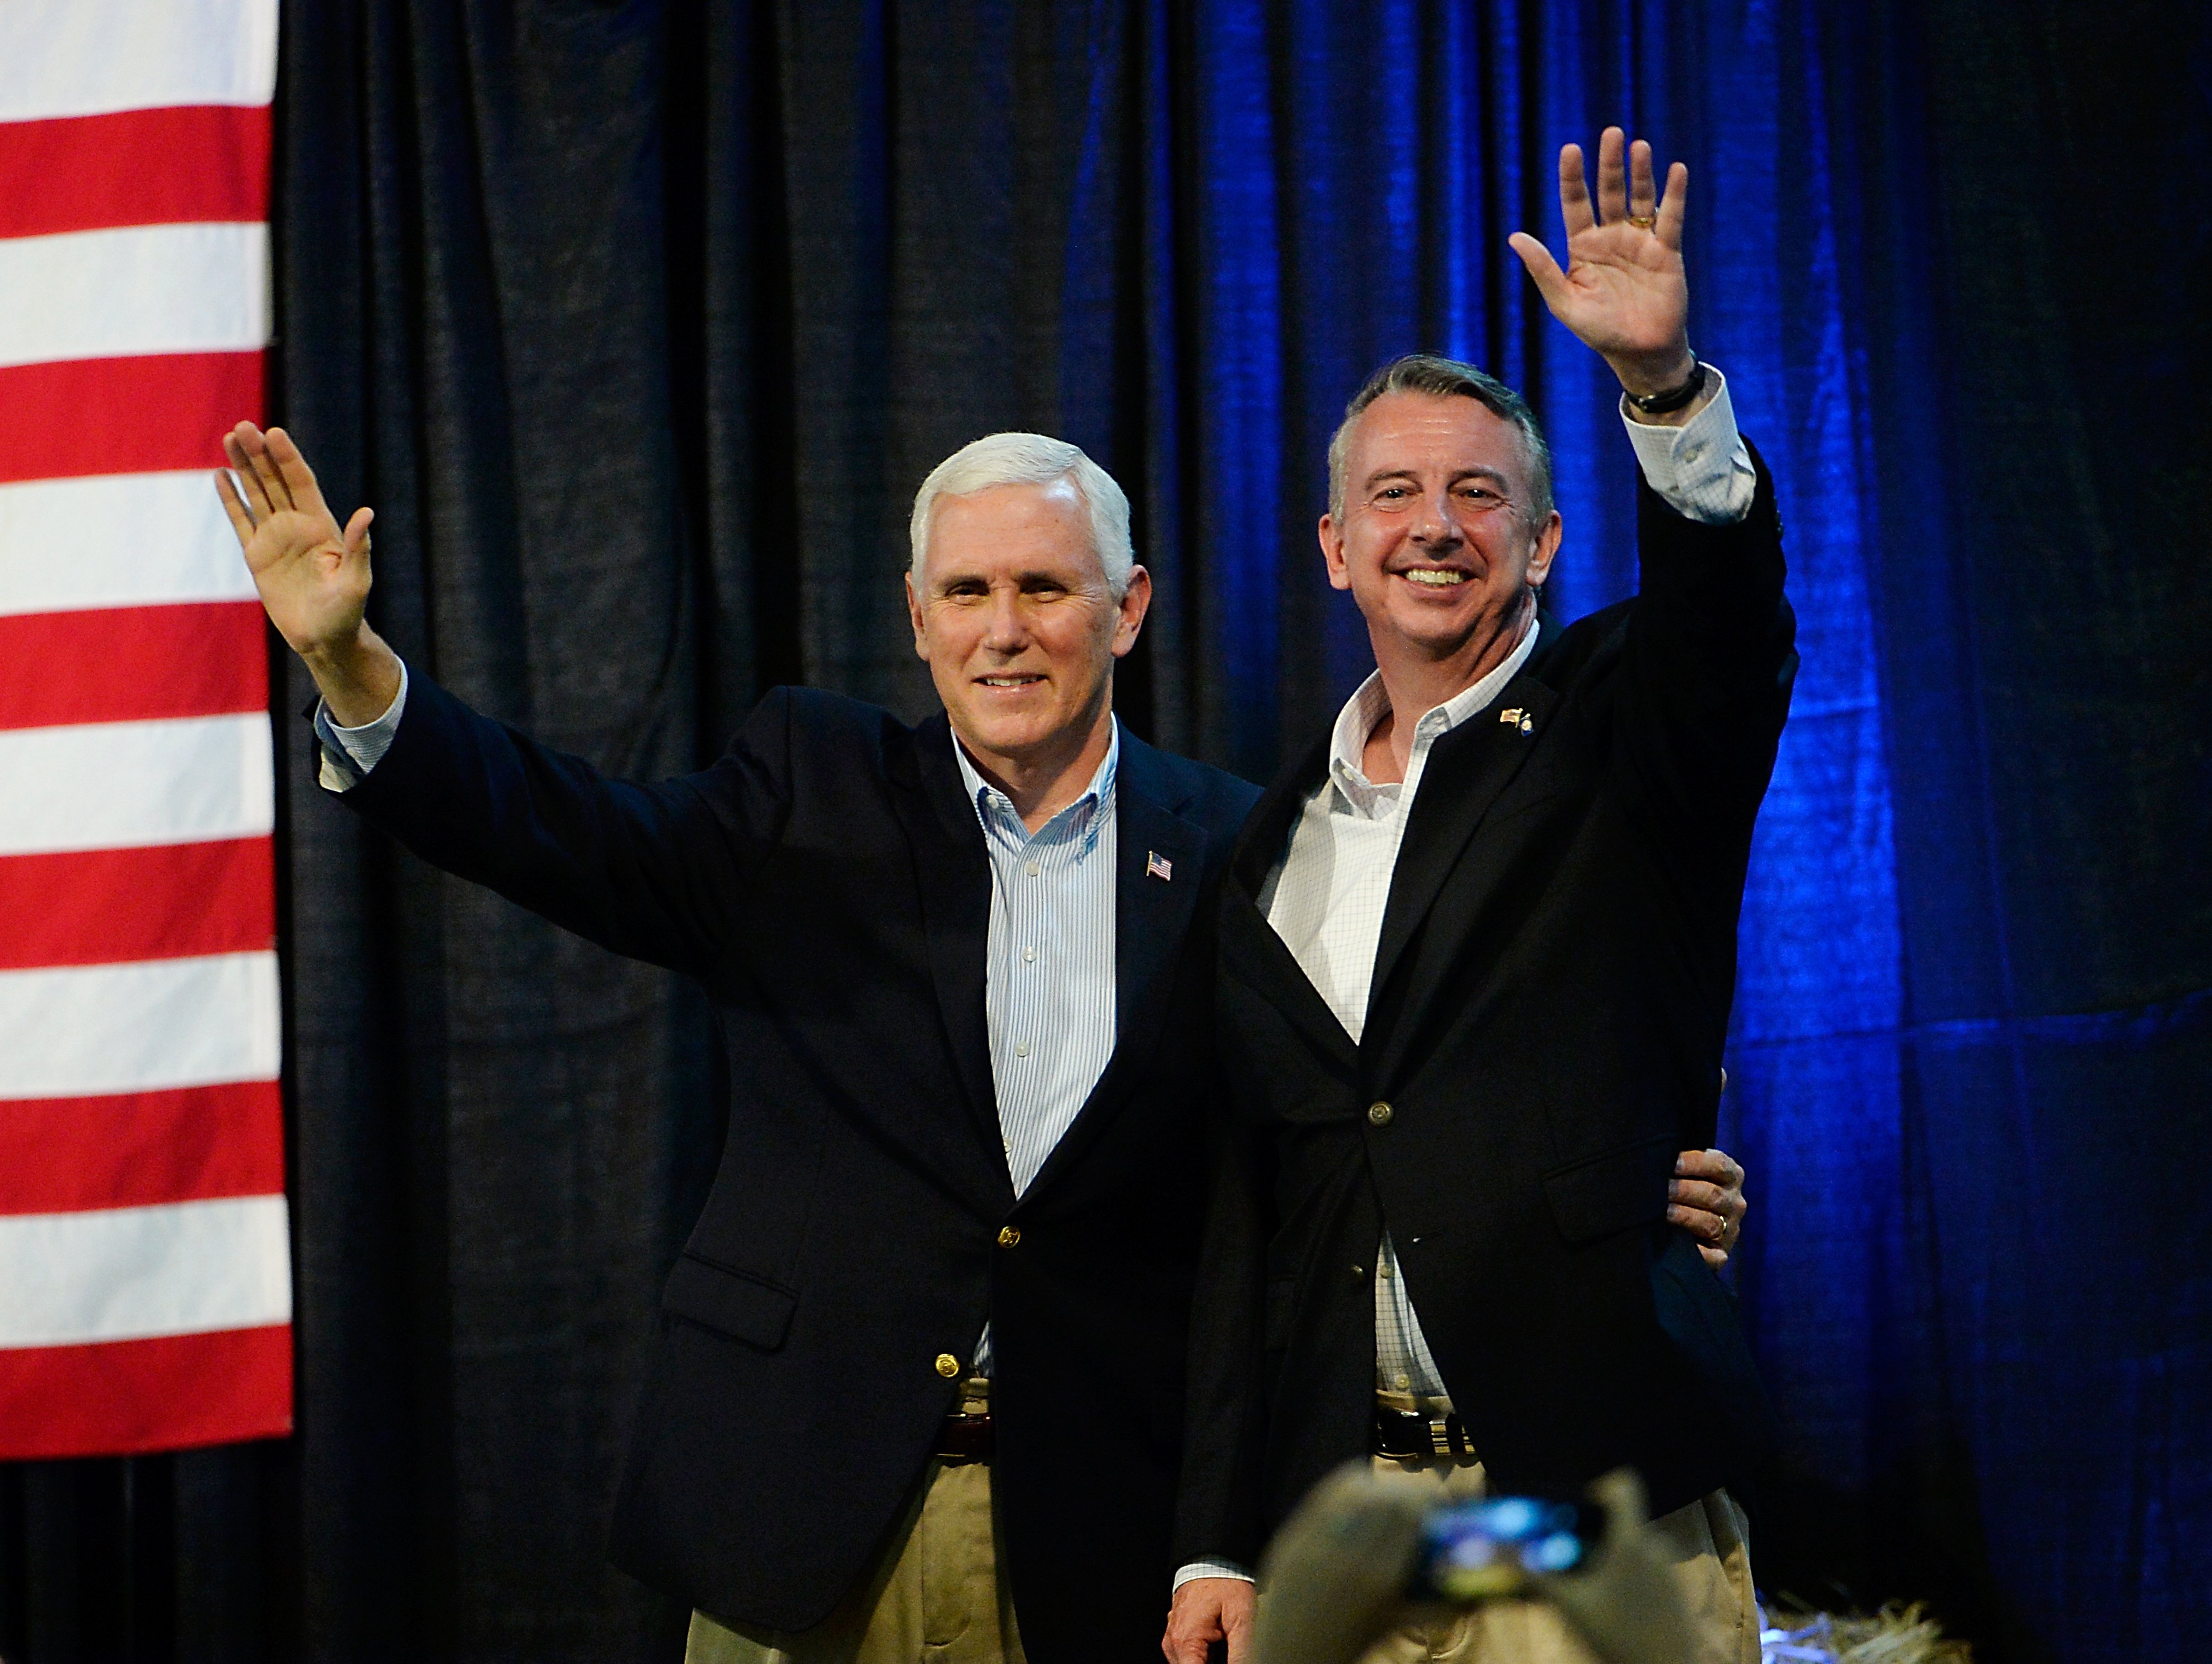 ABINGDON, VA - OCTOBER 14: U.S. Vice President Mike Pence, left, and gubernatorial candidate Ed Gillespie, R-VA, wave during a campaign rally at the Washington County Fairgrounds on October 14, 2017 in Abingdon, Virginia. Virginia voters head to the polls on Nov. 7. (Photo by Sara D. Davis/Getty Images)